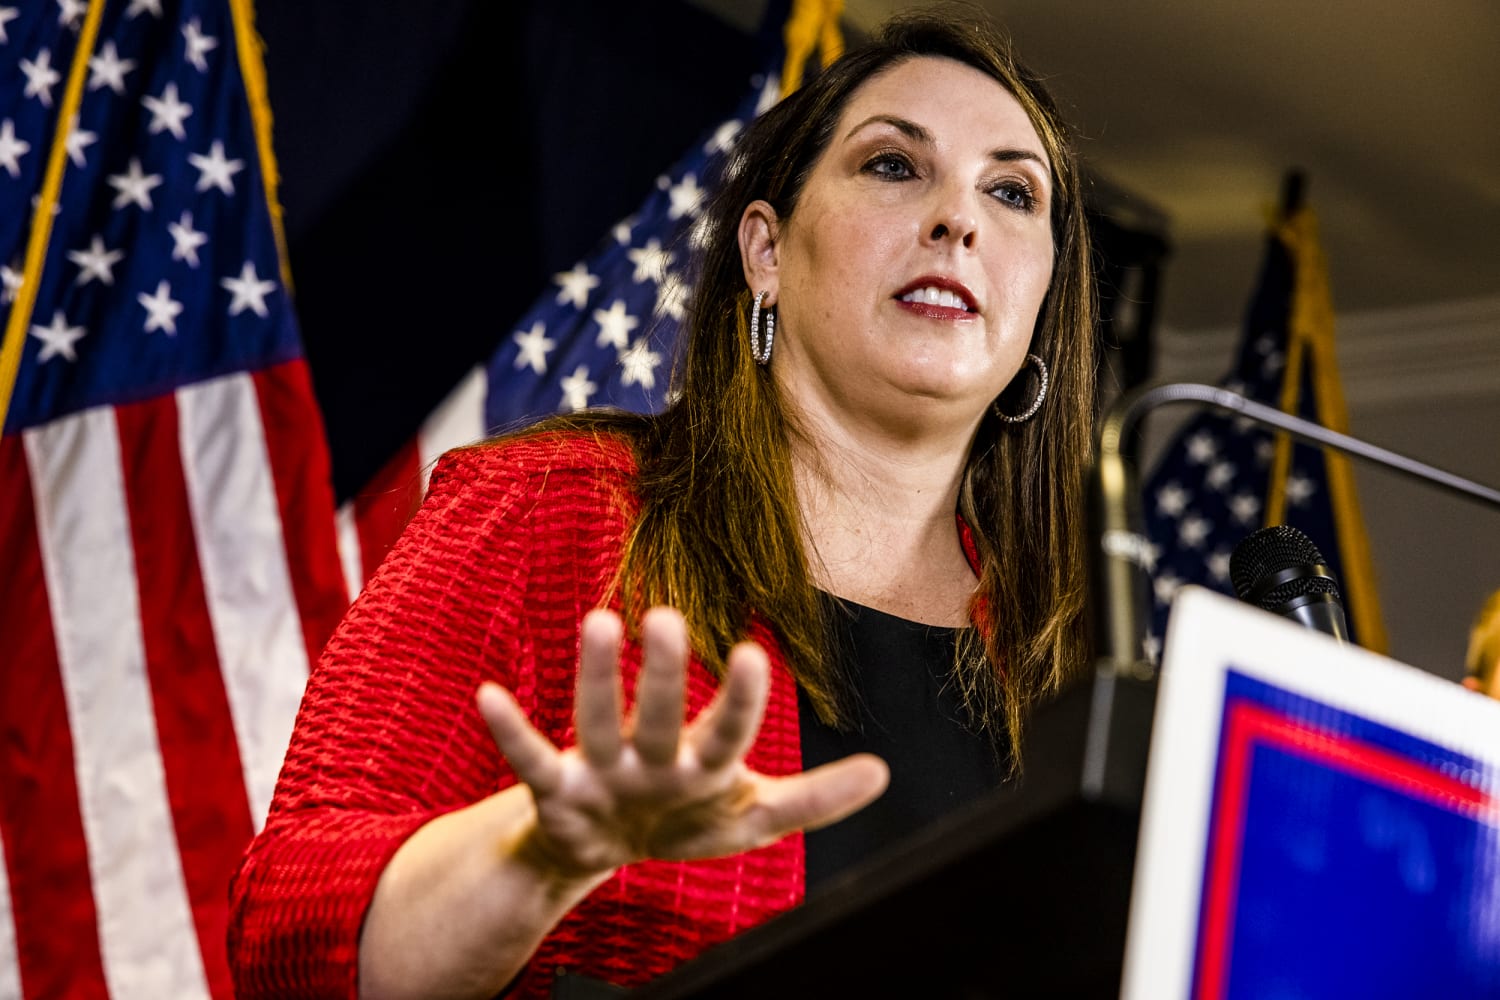 Ronna McDaniel pledged a neutral GOP primary for 2024. Trump will test